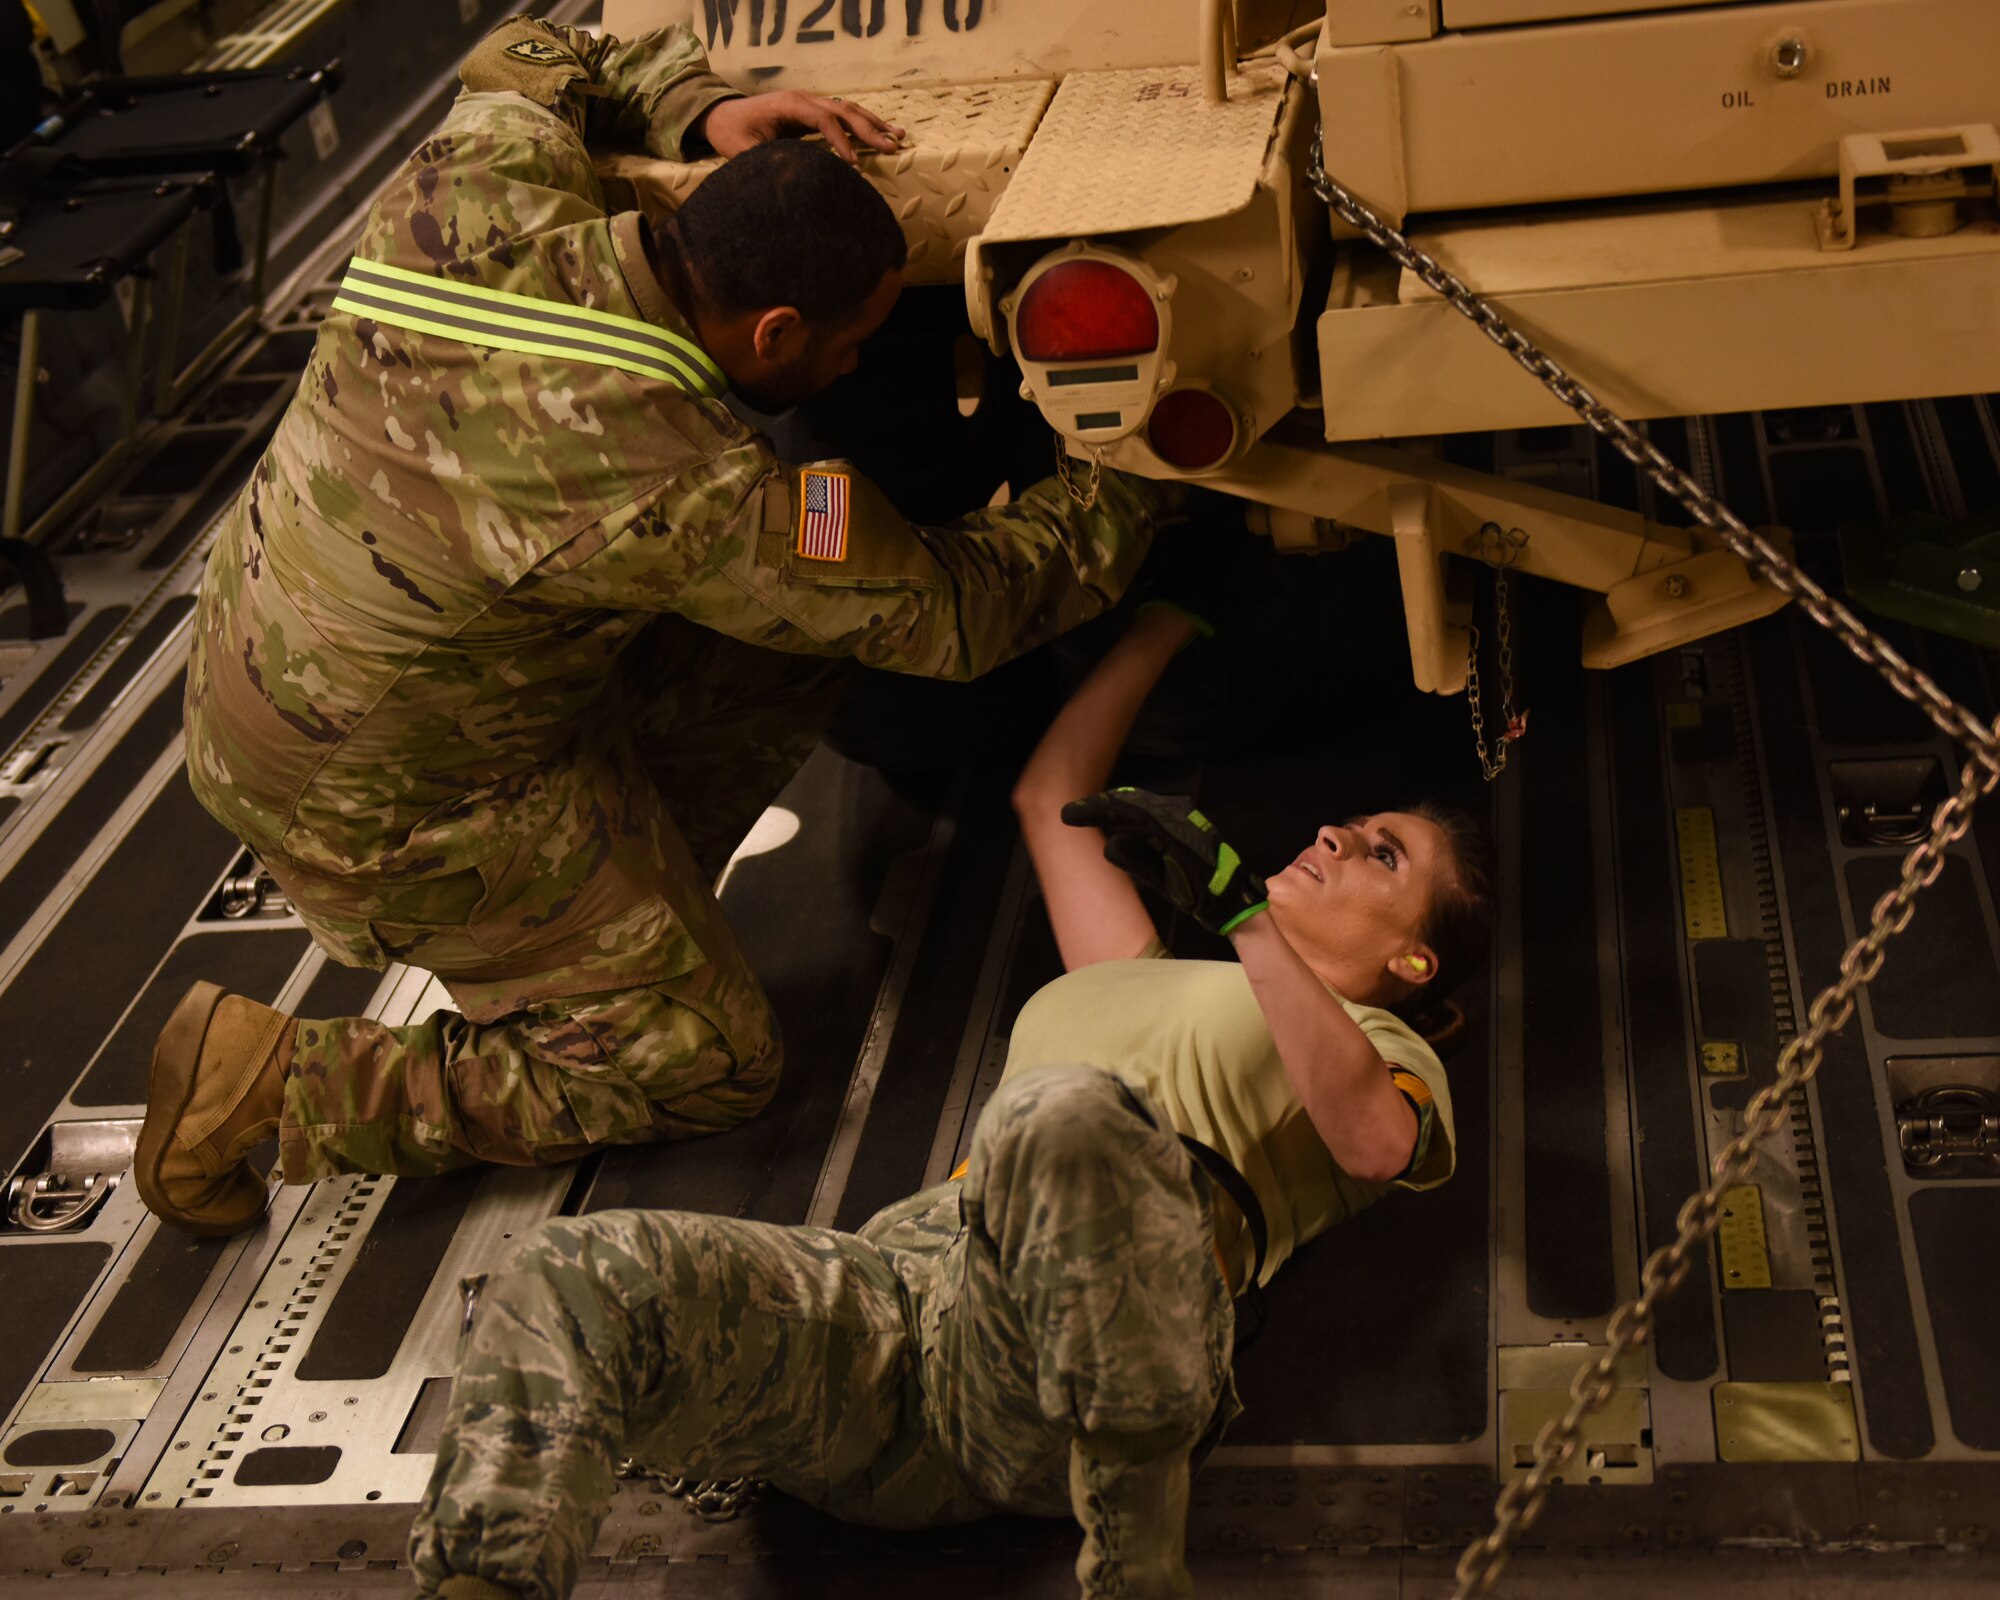 A U.S. Air Force Airman and a U.S. Army Soldier secure a truck to the cargo floor of a C-17 Globemaster III from the 60th Air Mobility Wing May 17, 2019, at Pope Army Air Field, North Carolina. The C-17 is capable of rapid strategic delivery of troops and cargo anywhere in the world. (U.S. Air Force photo by 2nd Lt. R. Michael Longoria)